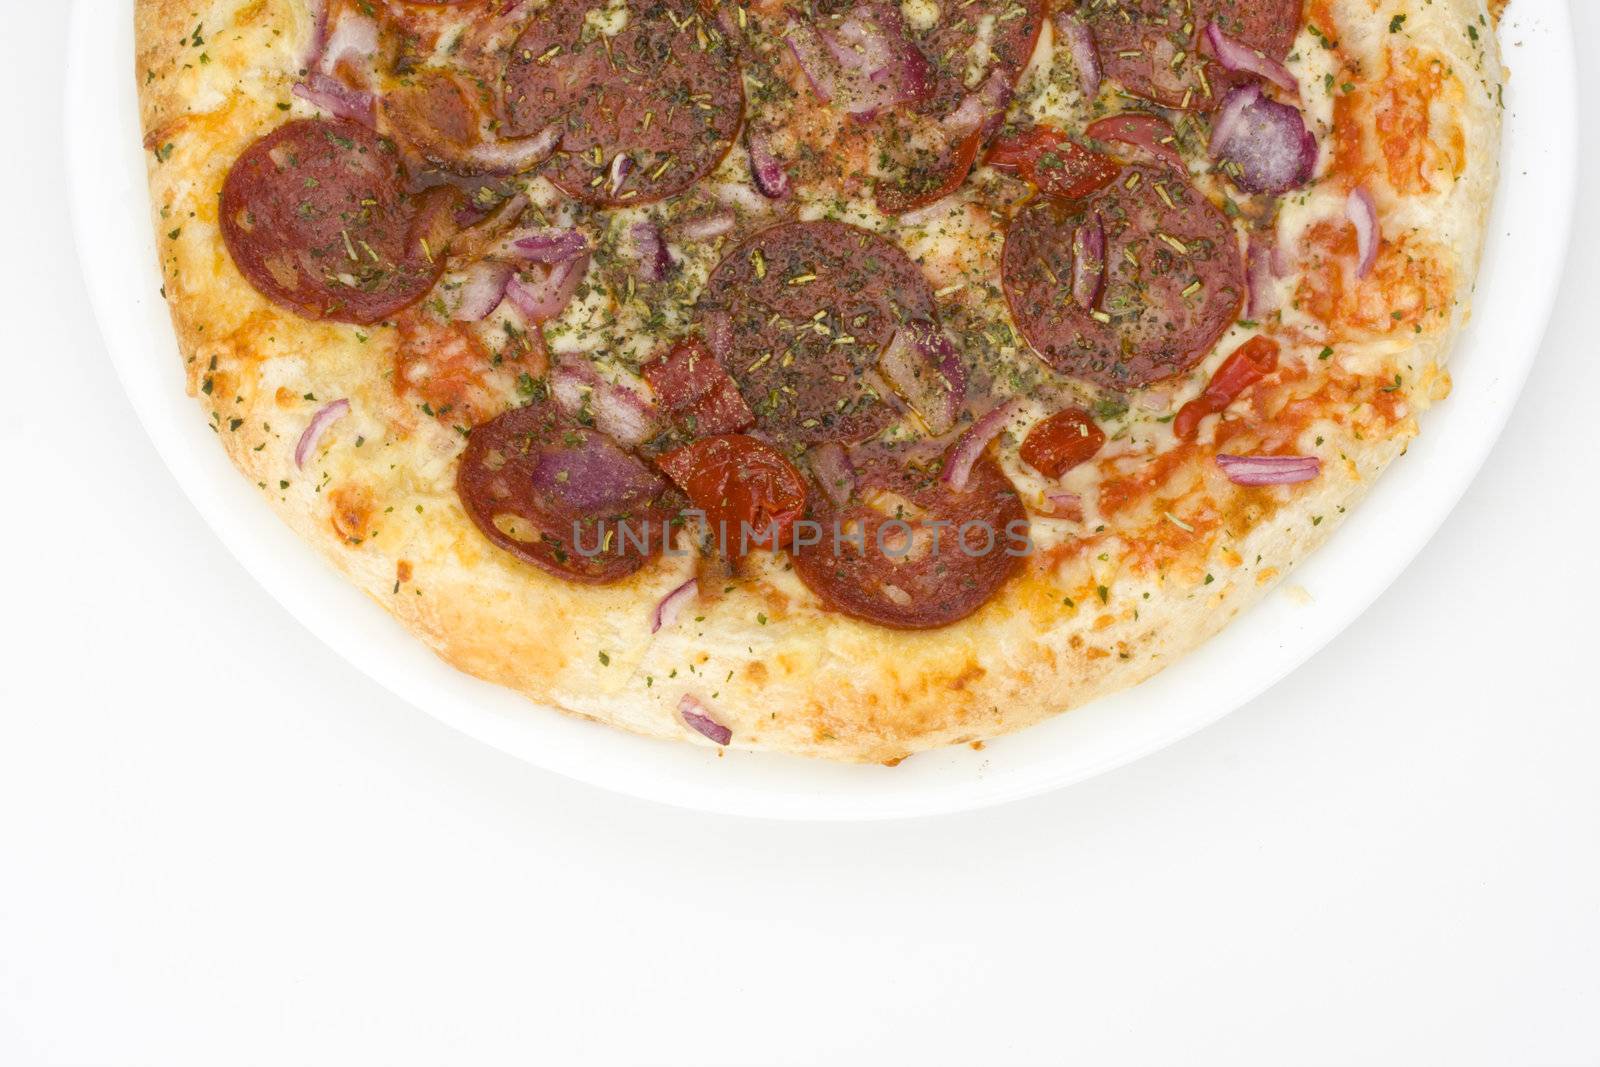 pizza on a plate on white background by bernjuer